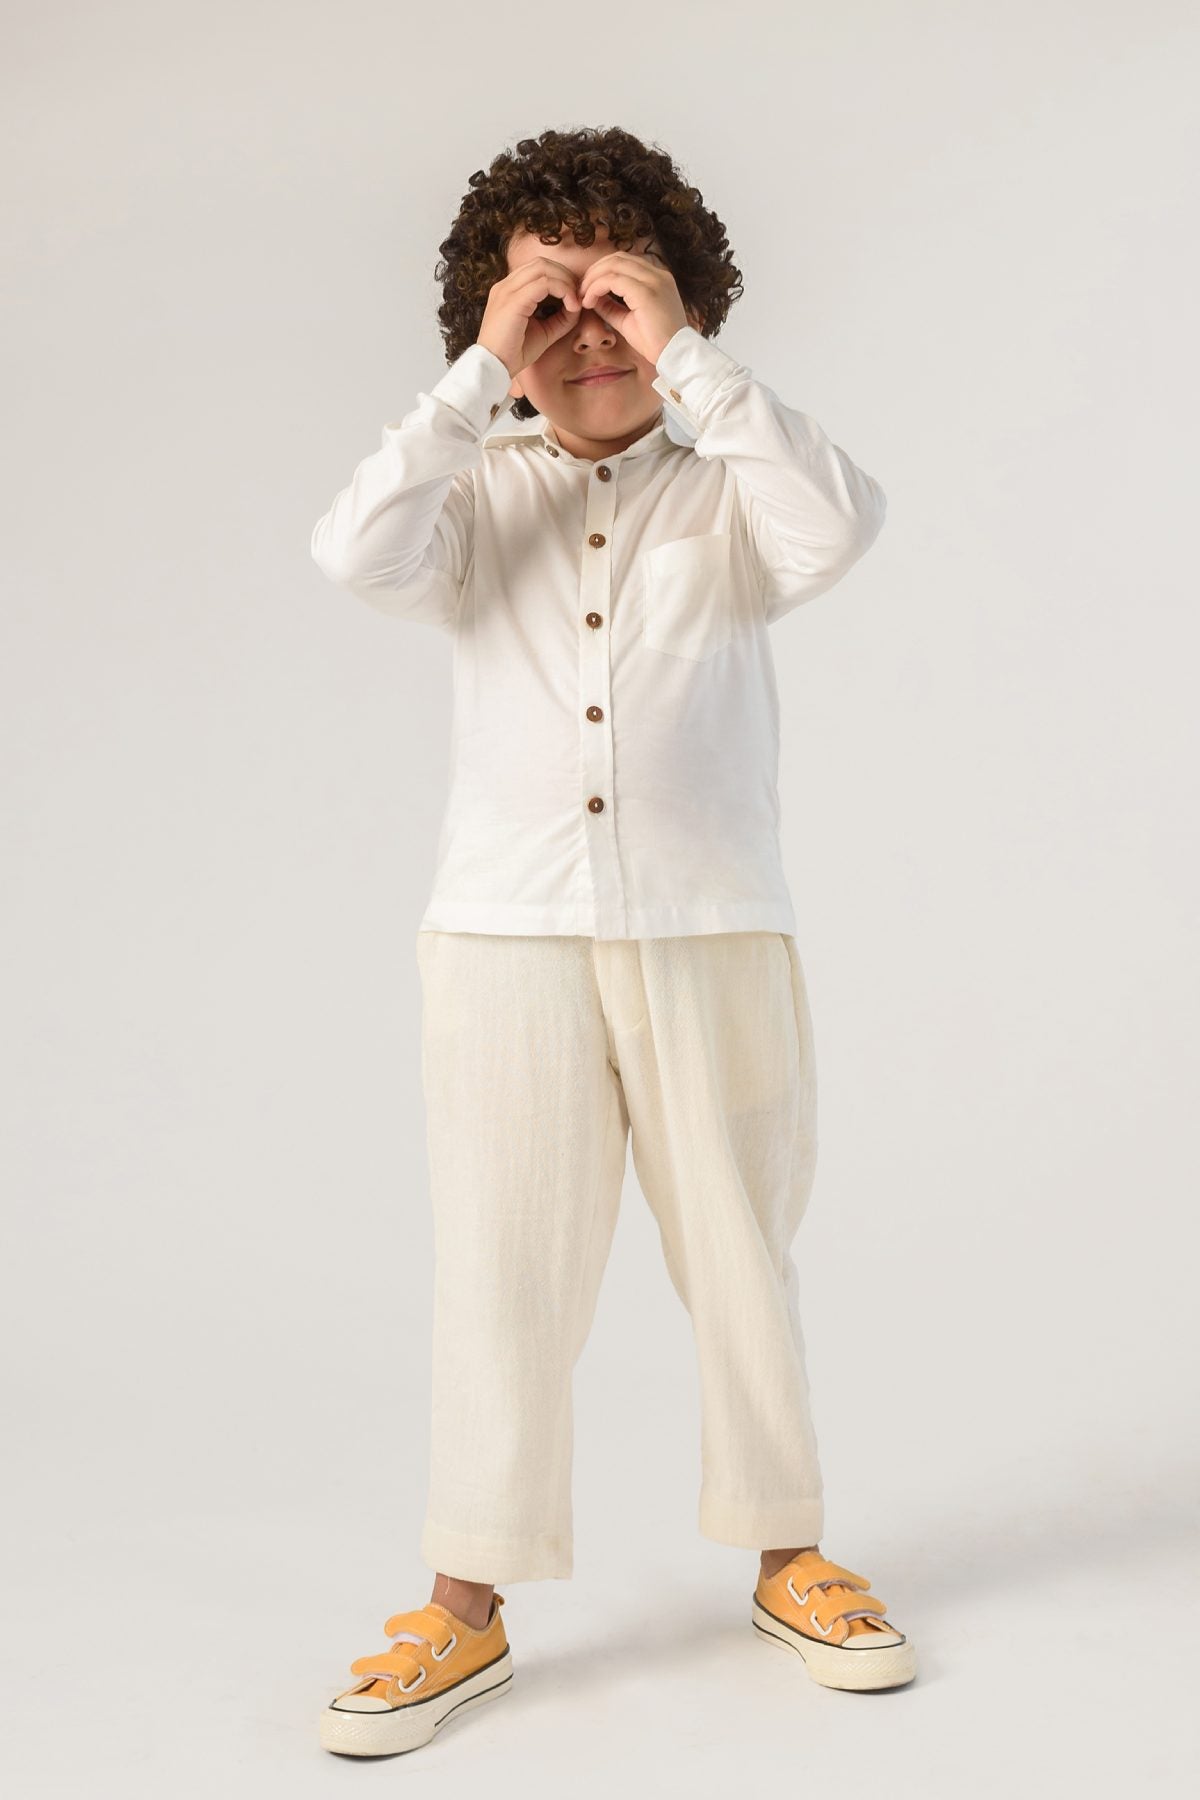 Buy Kids Designer Littleens Solid shirt with button down collar, full sleeves and bamboo buttons Online at ScrollnShops